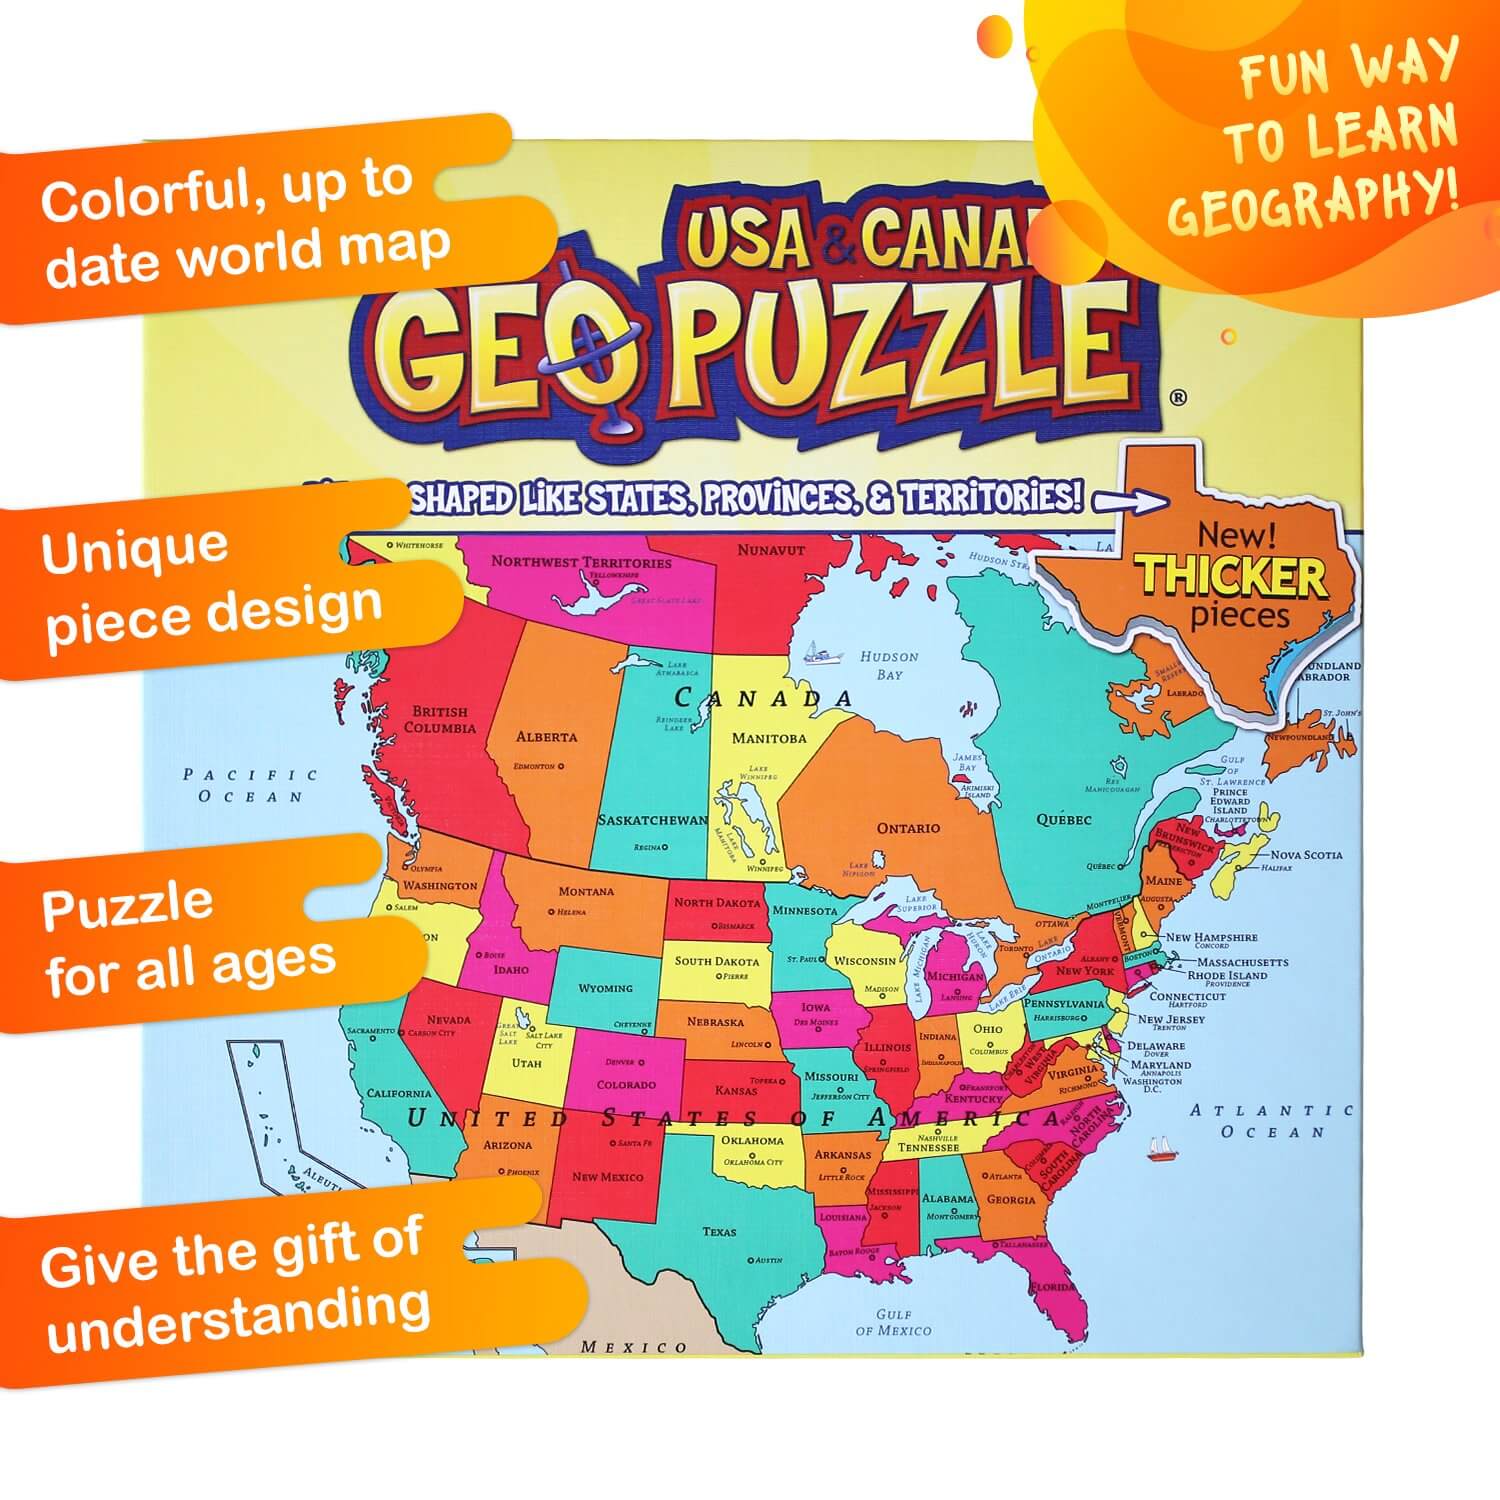 GeoPuzzle USA & Canada - A2Z Science & Learning Toy Store